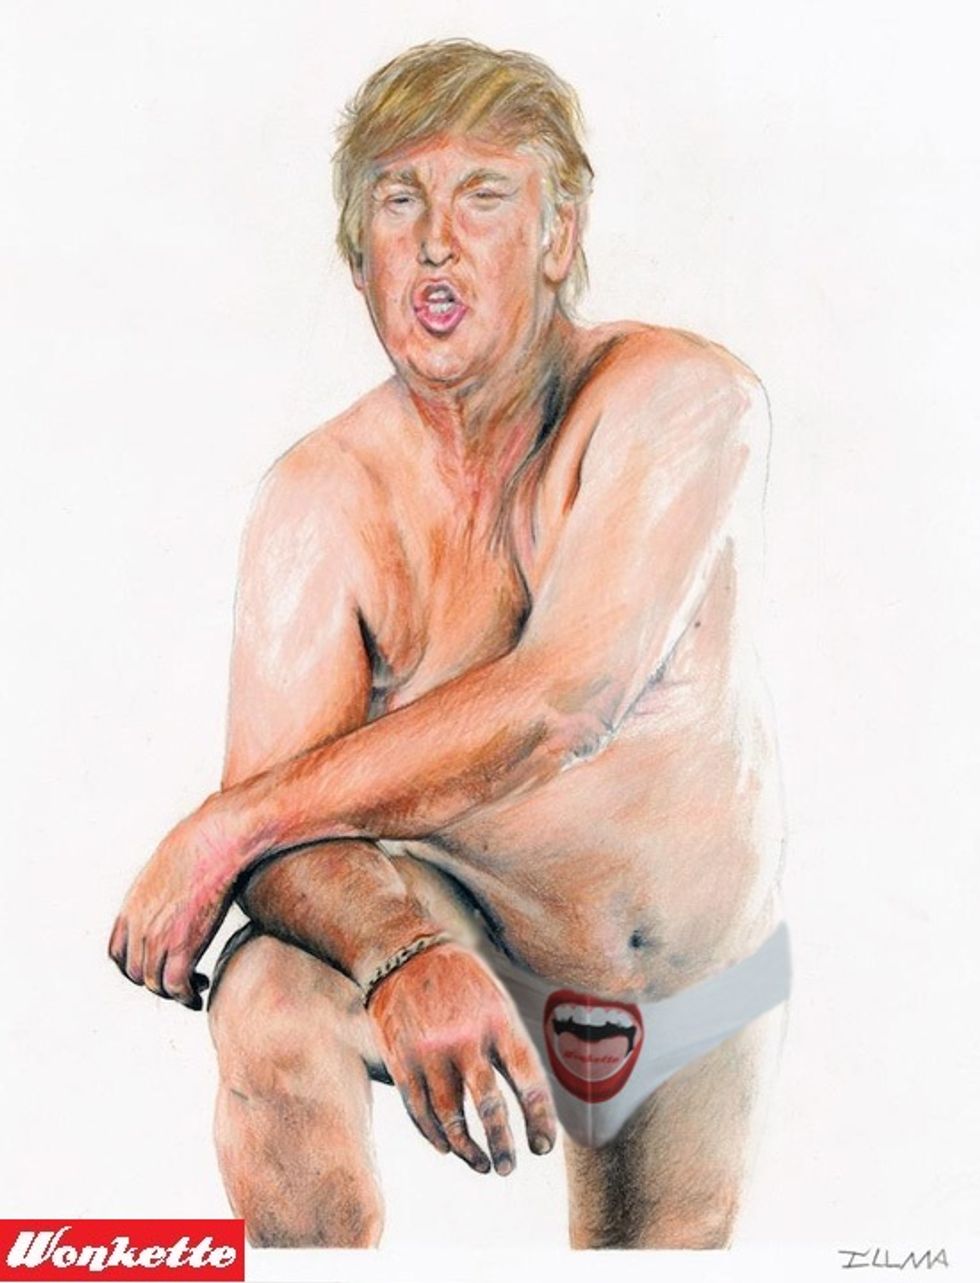 Donald Trump Rises Firm And Hard To Sue Artist Who Painted Him With Itty-Bitty Peener